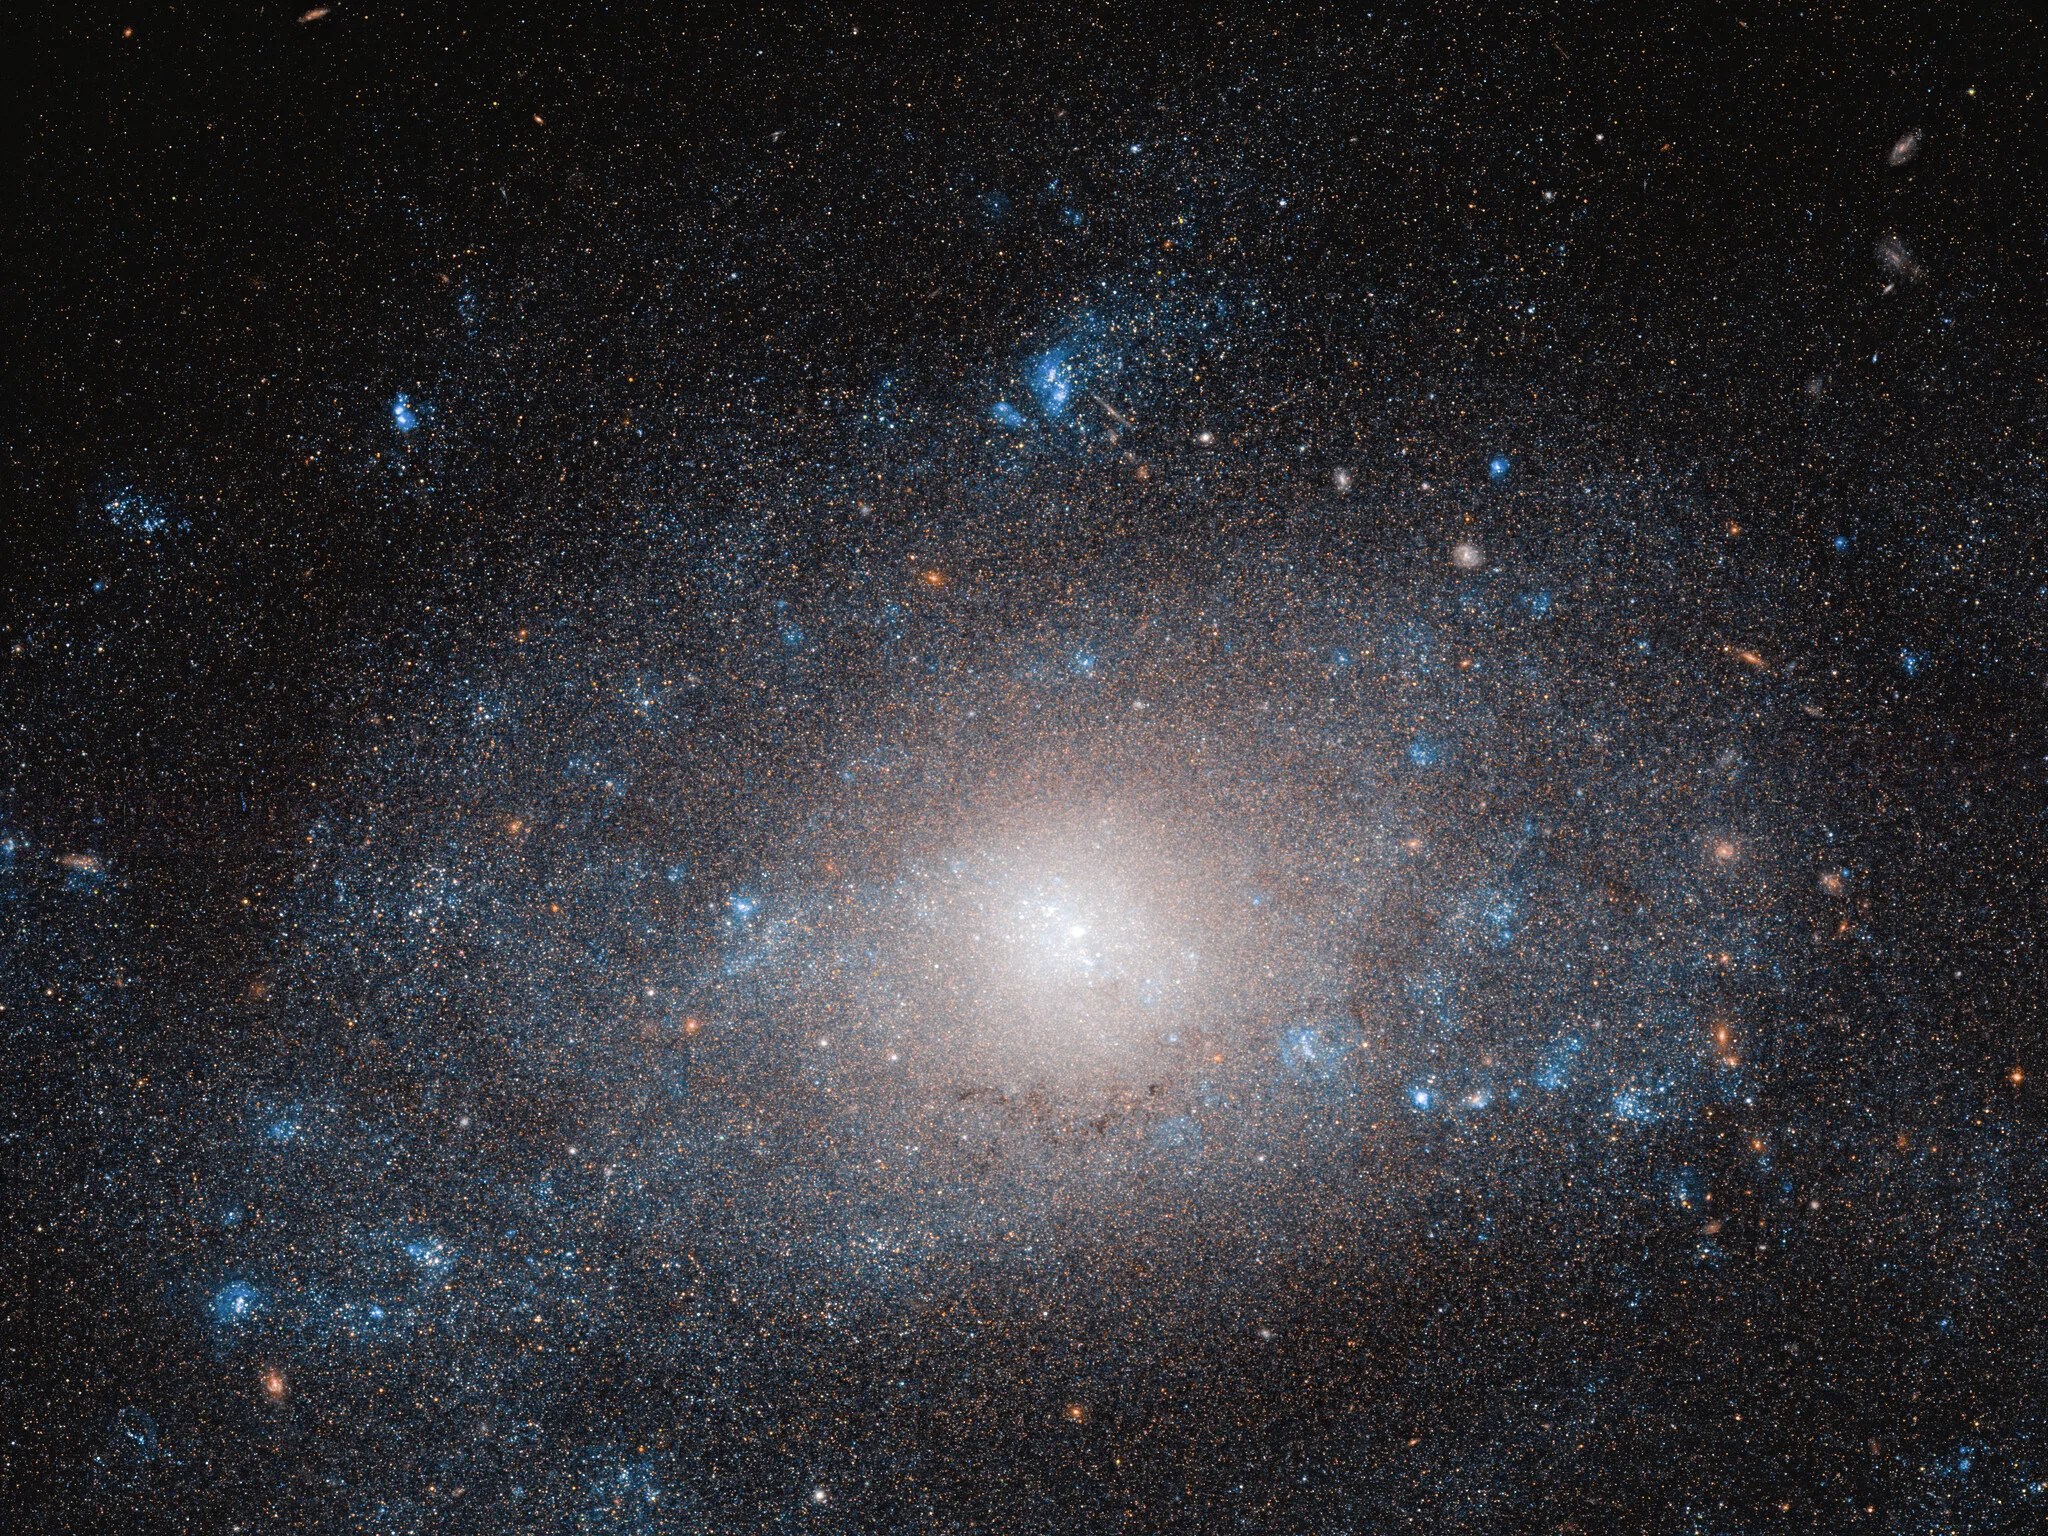 Glowing center and spiral arms, flecked with blue-hued stars, of galaxy ngc 5585 against the black backdrop of space